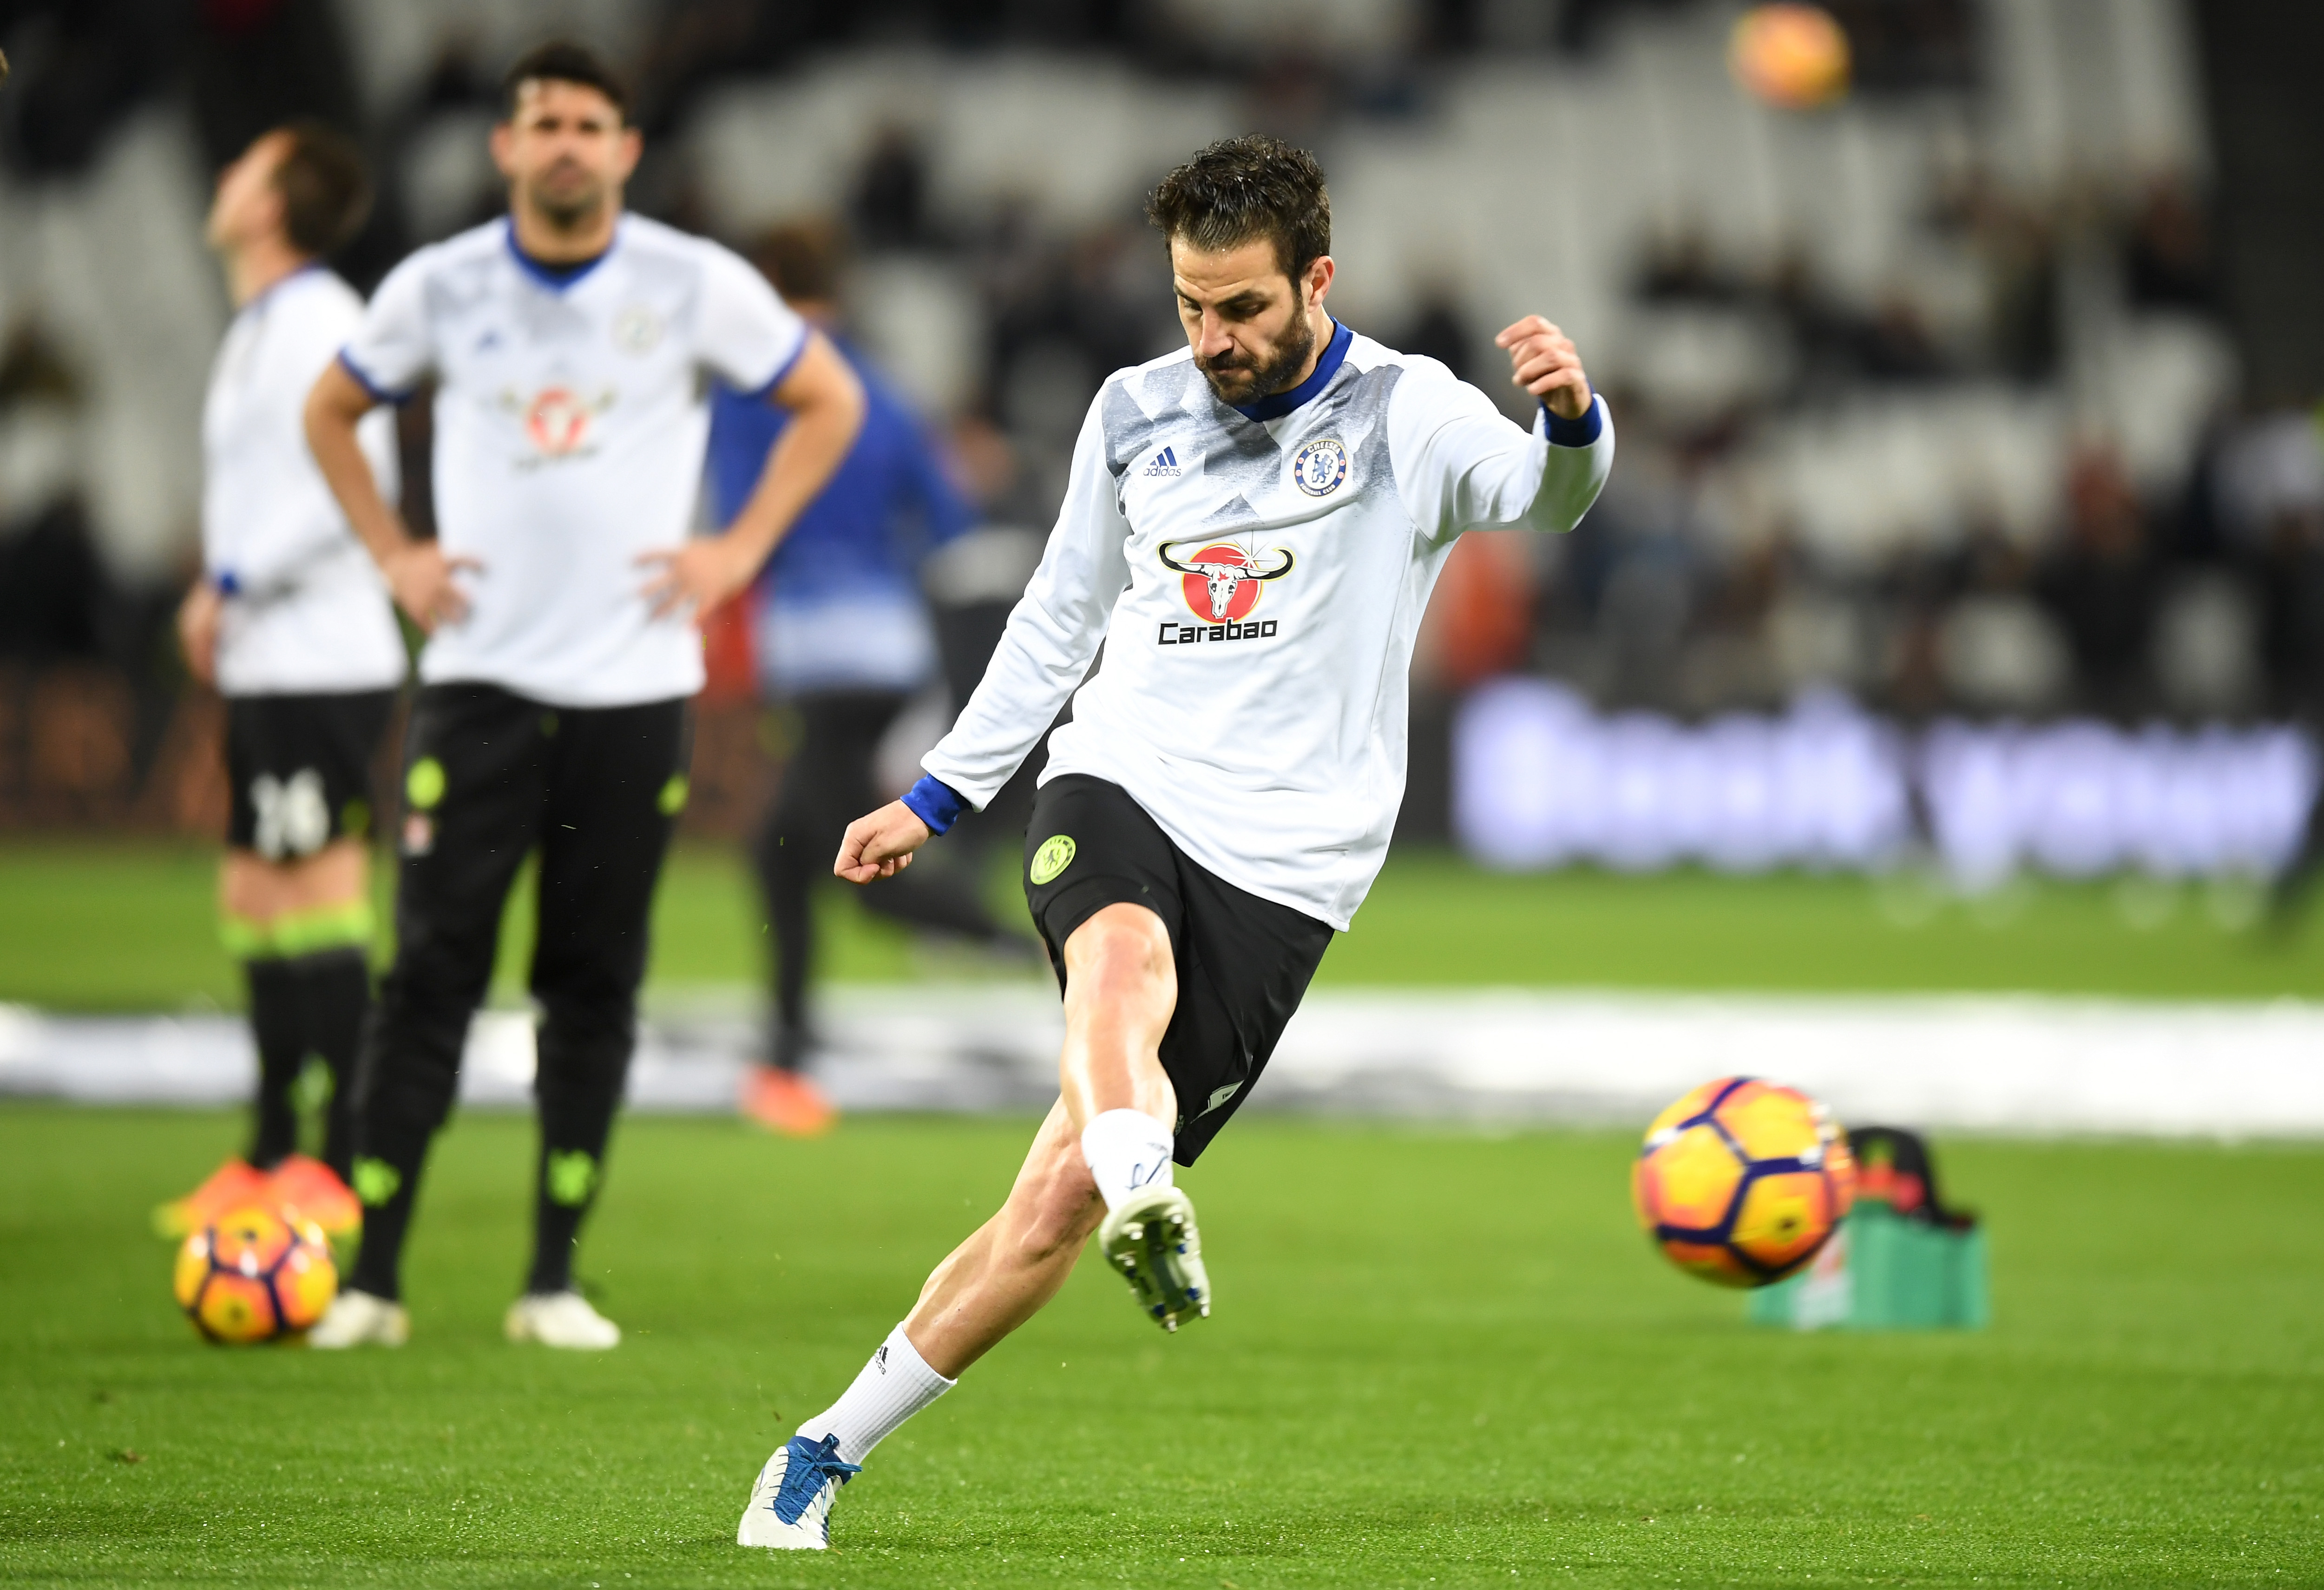 STRATFORD, ENGLAND - MARCH 06:  Cesc Fabregas of Chelsea warms up prior to the Premier League match between West Ham United and Chelsea at London Stadium on March 6, 2017 in Stratford, England.  (Photo by Michael Regan/Getty Images)